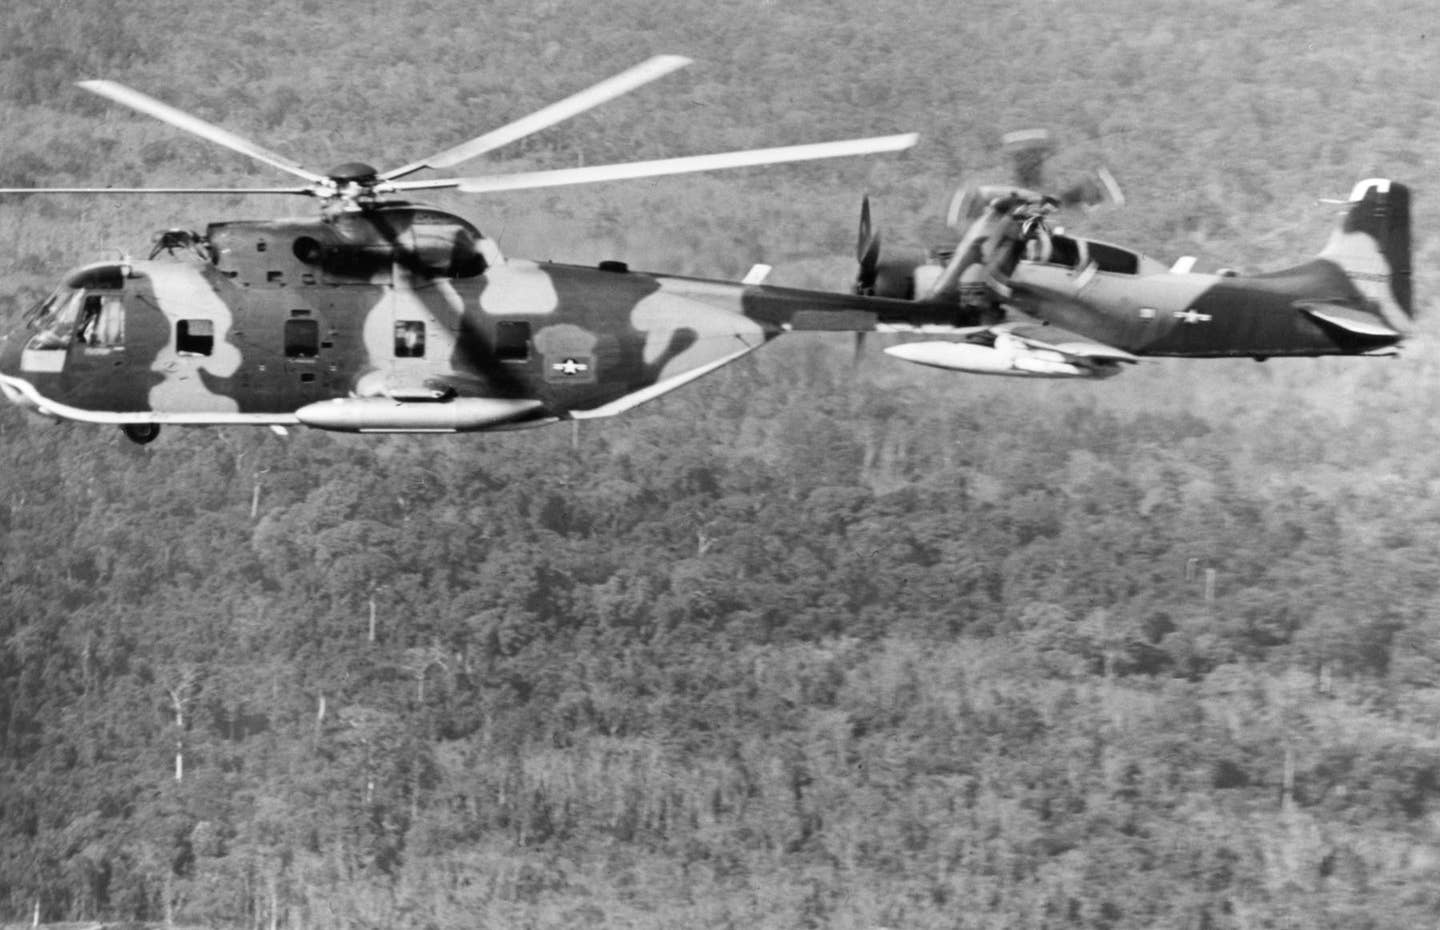 a-1 skyraider escorting a helicopter